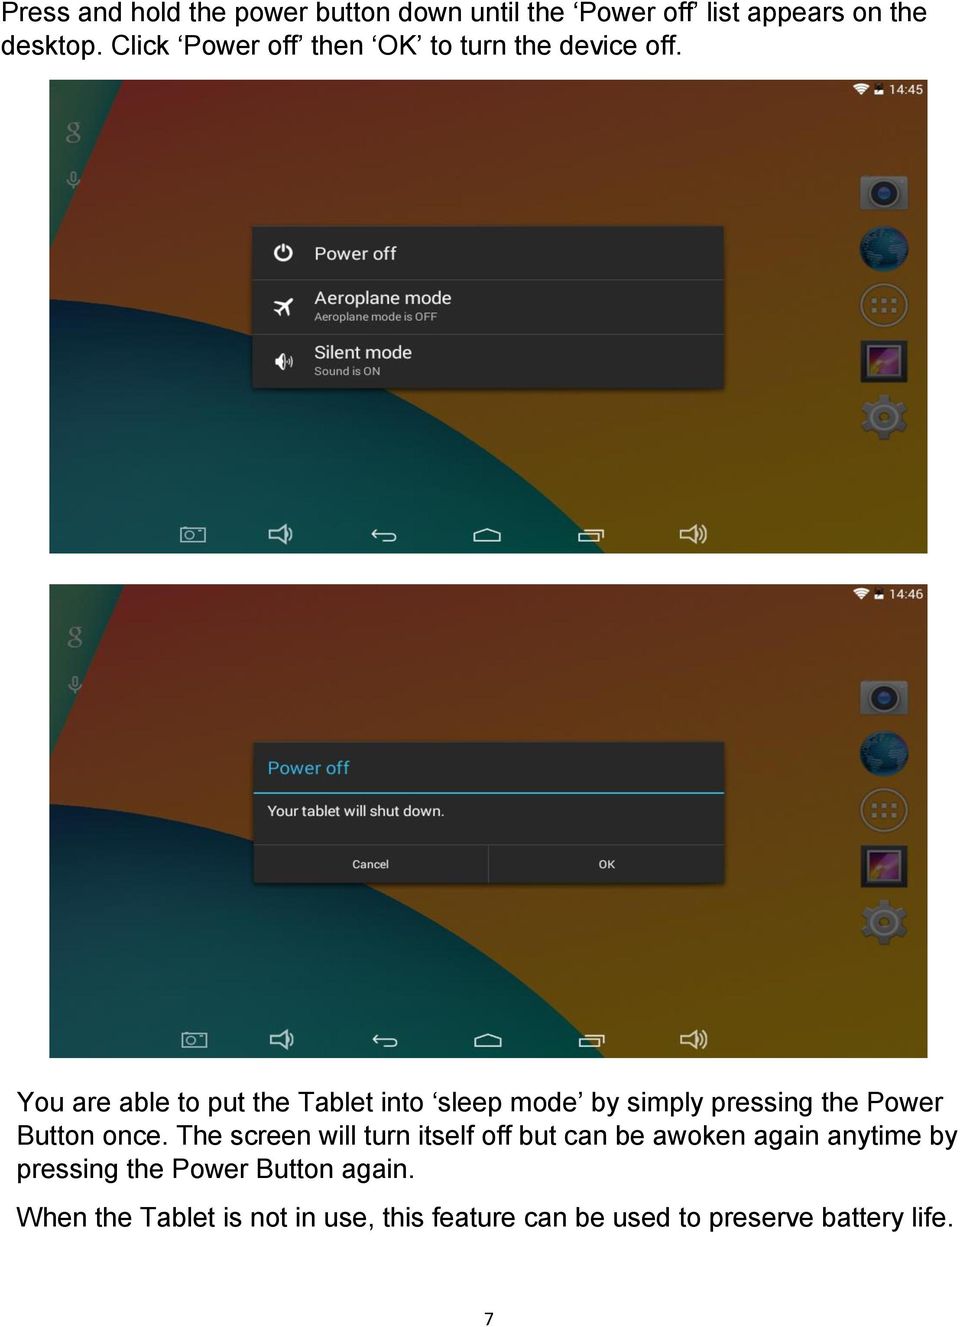 You are able to put the Tablet into sleep mode by simply pressing the Power Button once.